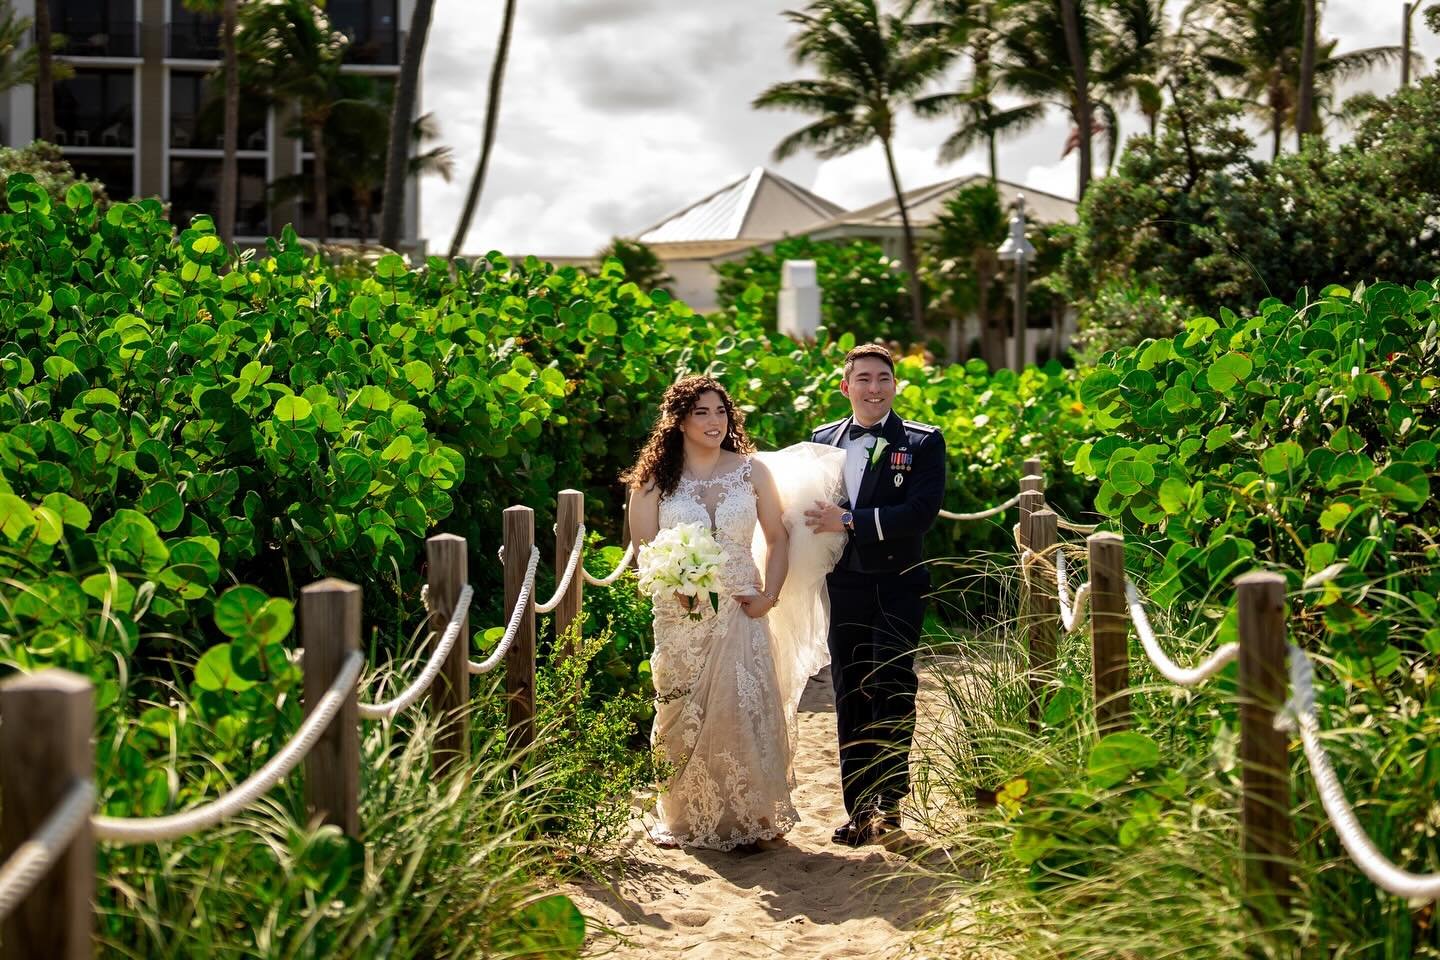 Let&rsquo;s stroll down the beach 🏝️ don&rsquo;t worry I got you babe 😉 
.
.
.
Events with a Promise 
South Fl Certified | Boutique Wedding Planning &amp; Design specializes in Destinations and Honeymoons
💁🏻&zwj;♀️ Your Planner Monica Reyes 
💻 E